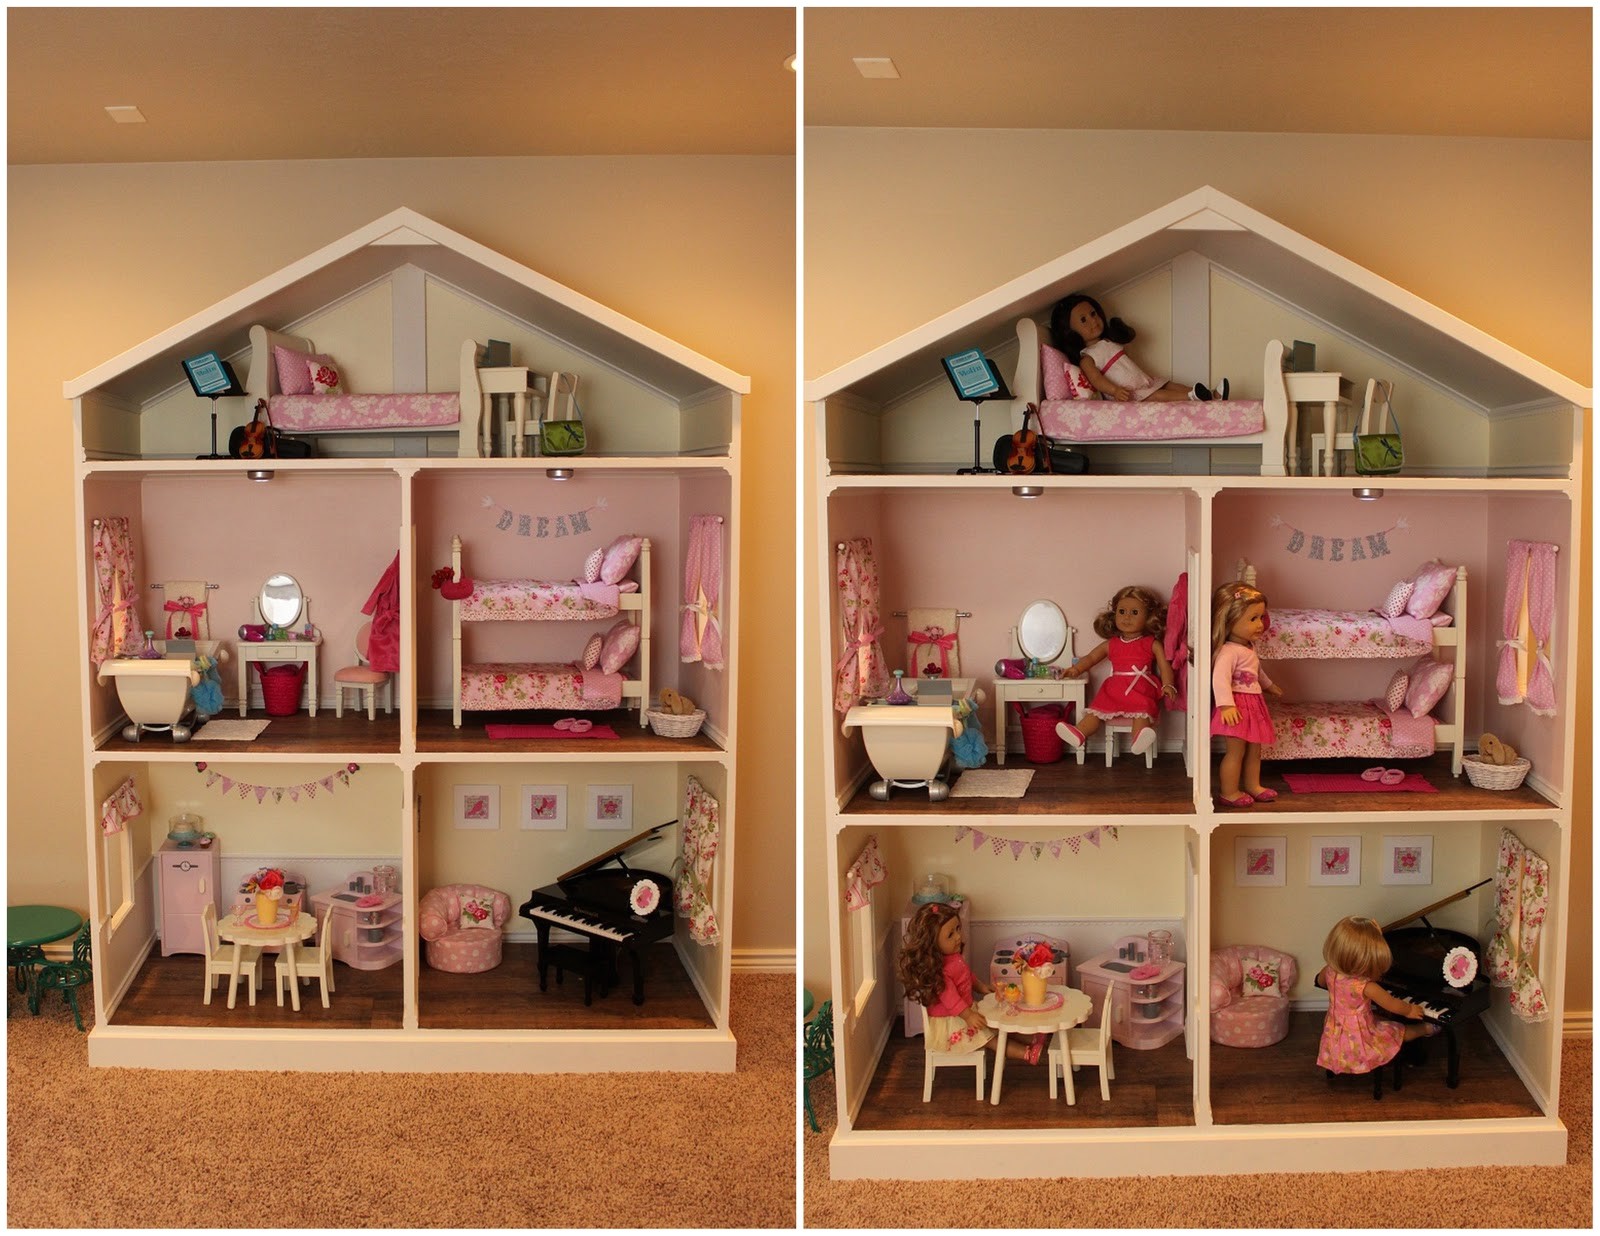 American Girl Doll House Plans Kent and Denise Conder Family American Girl the